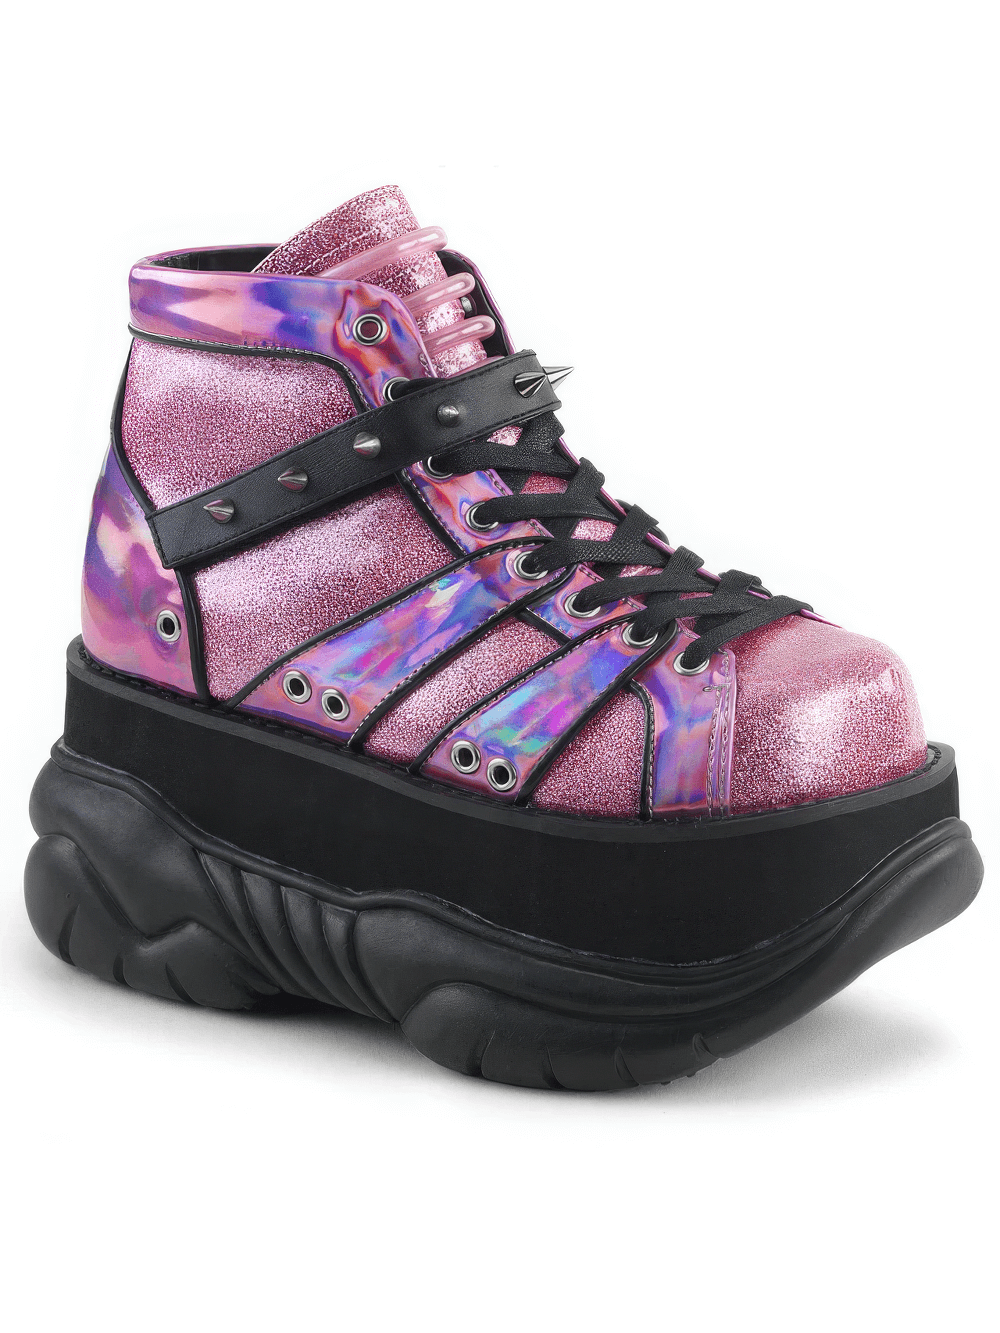 DEMONIA Pink Glitter Platform Ankle Boots with Cone Studs